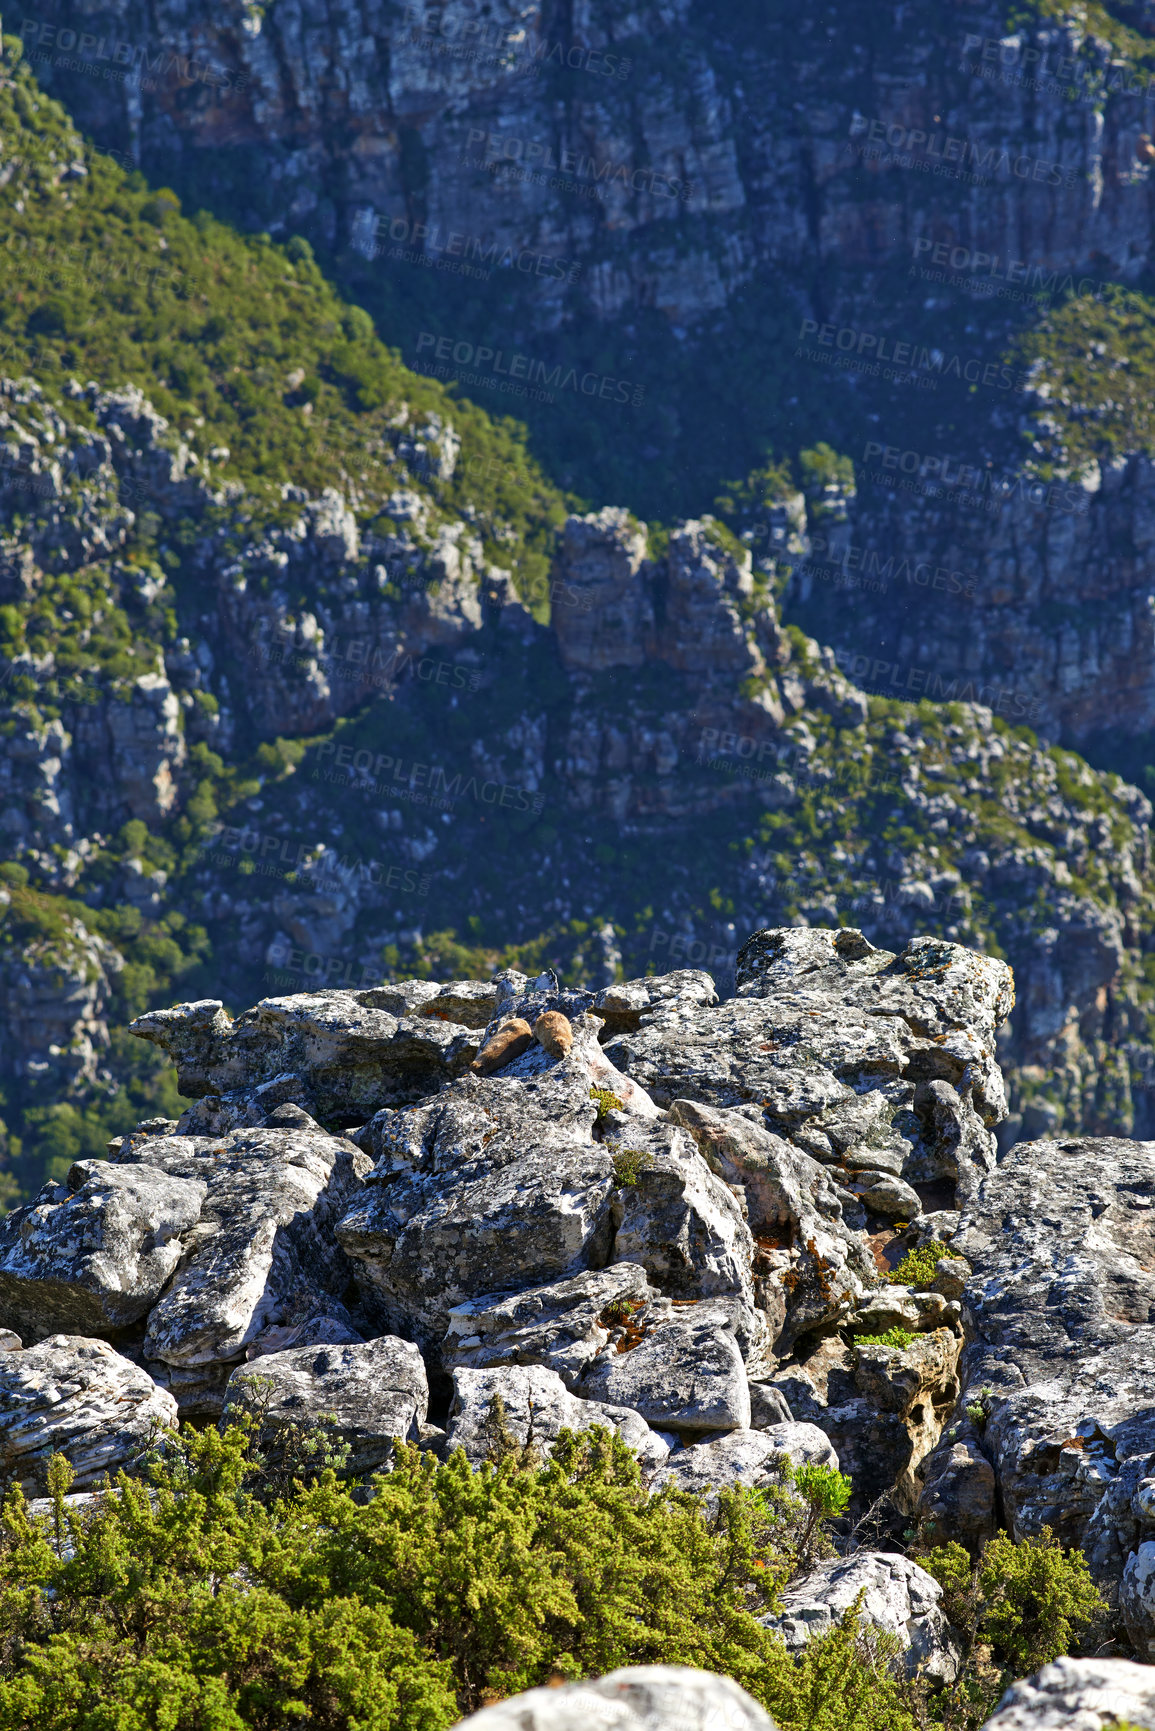 Buy stock photo A rocky mountainside landscape of Table Mountain National Park, Cape Town, South Africa on a summer's day. Lush green vegetation growing in between rocks and boulders on a nature reserve